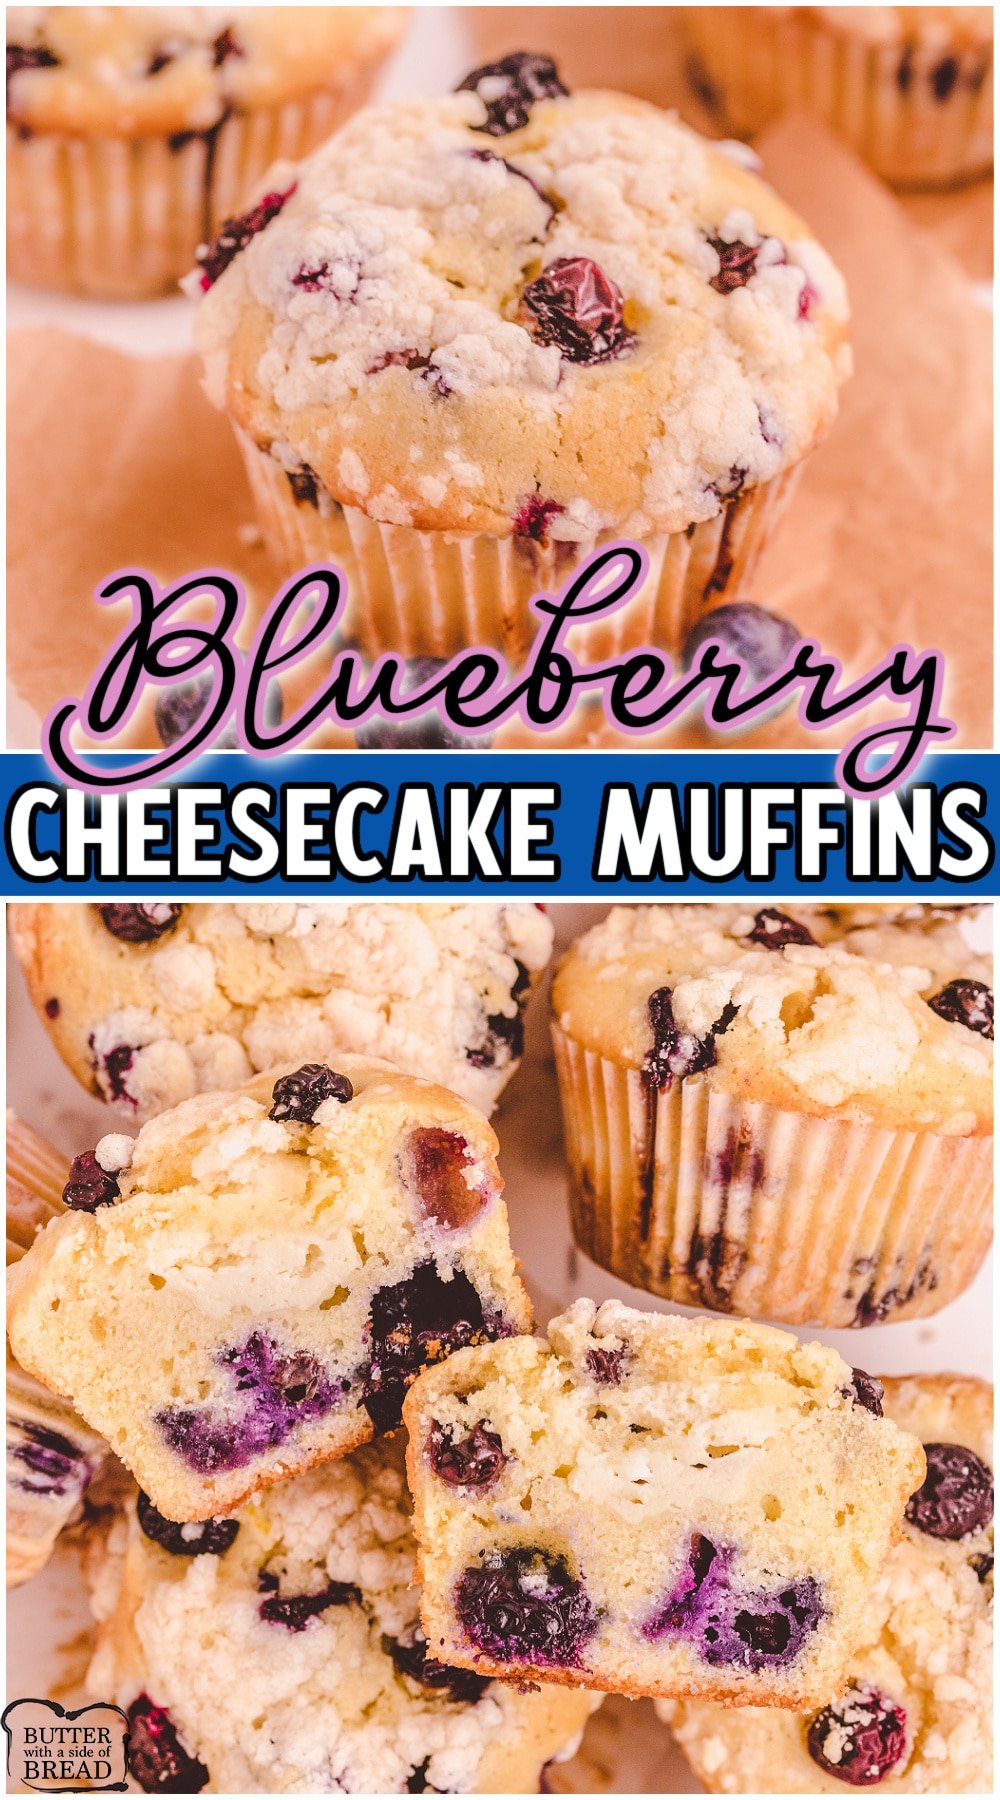 Blueberry Cheesecake Muffins are a delightful homemade breakfast packed with juicy blueberries and a yummy cream cheese filling! Our Blueberry muffins are made easy with common ingredients in minutes!